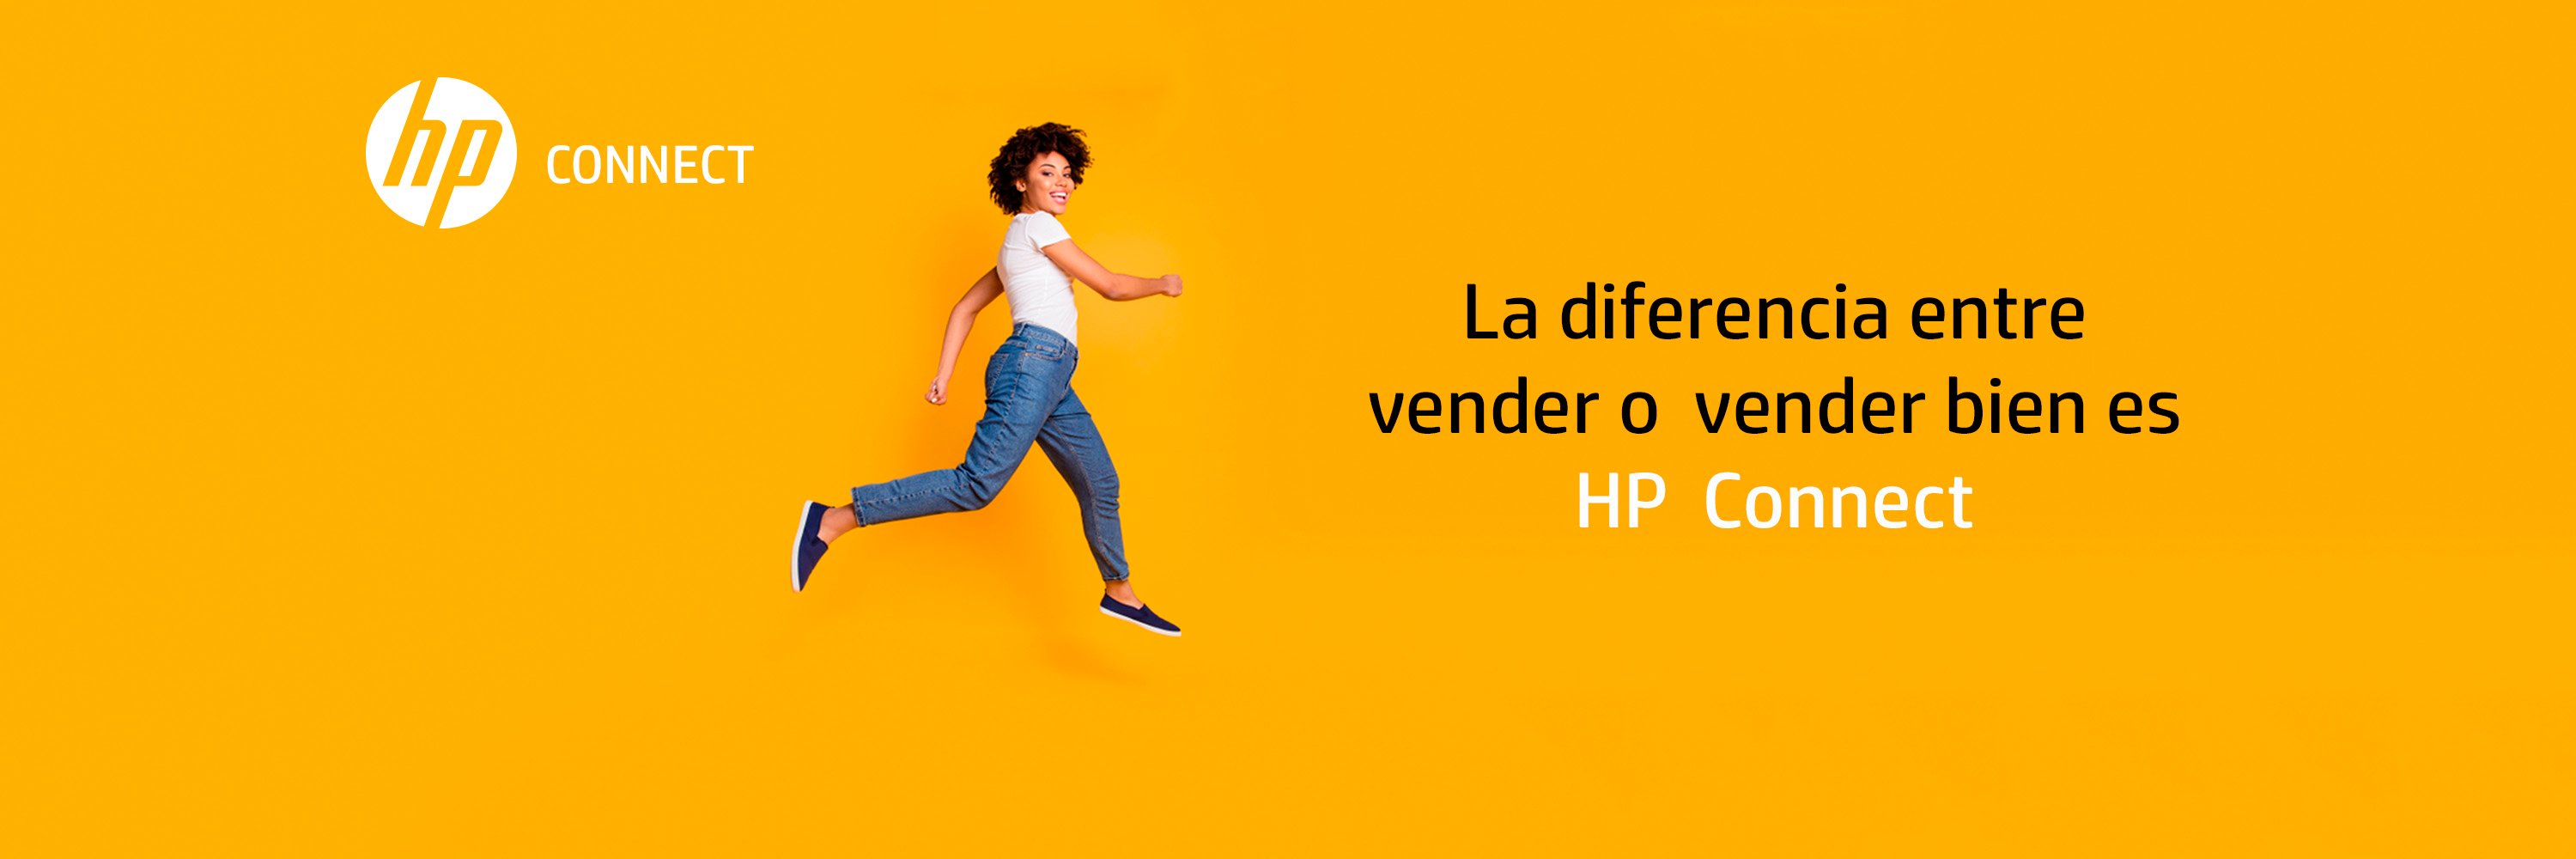 hp_connect_header3